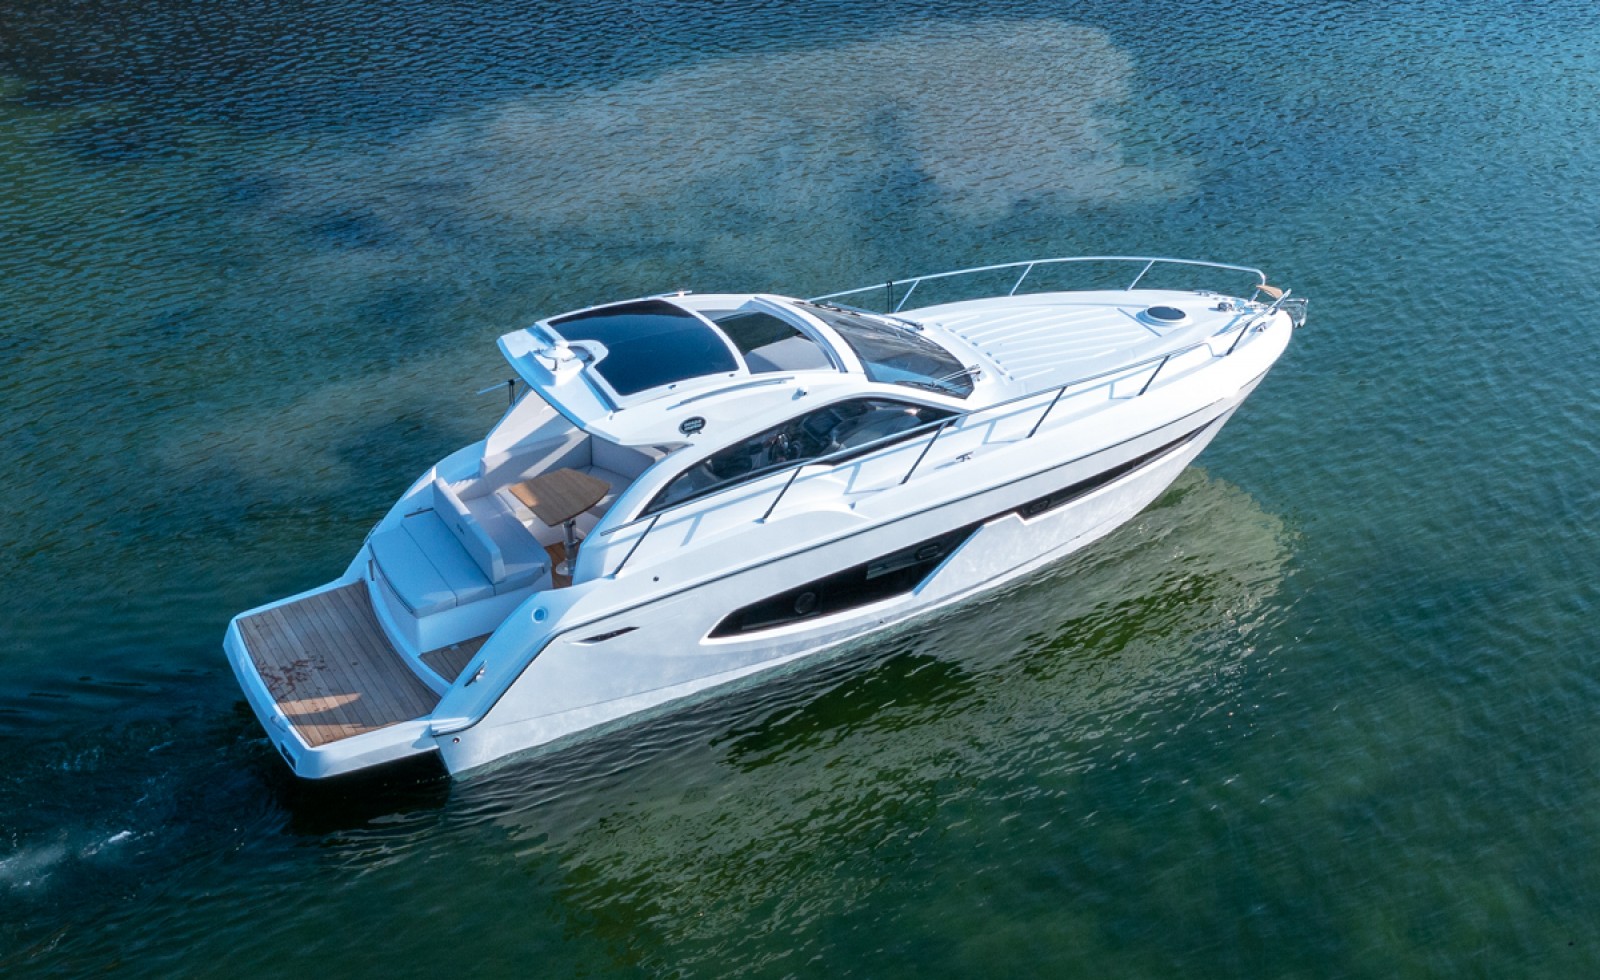 Sessa to premiere C3X at Venice Boat Show from May 28-June 5.